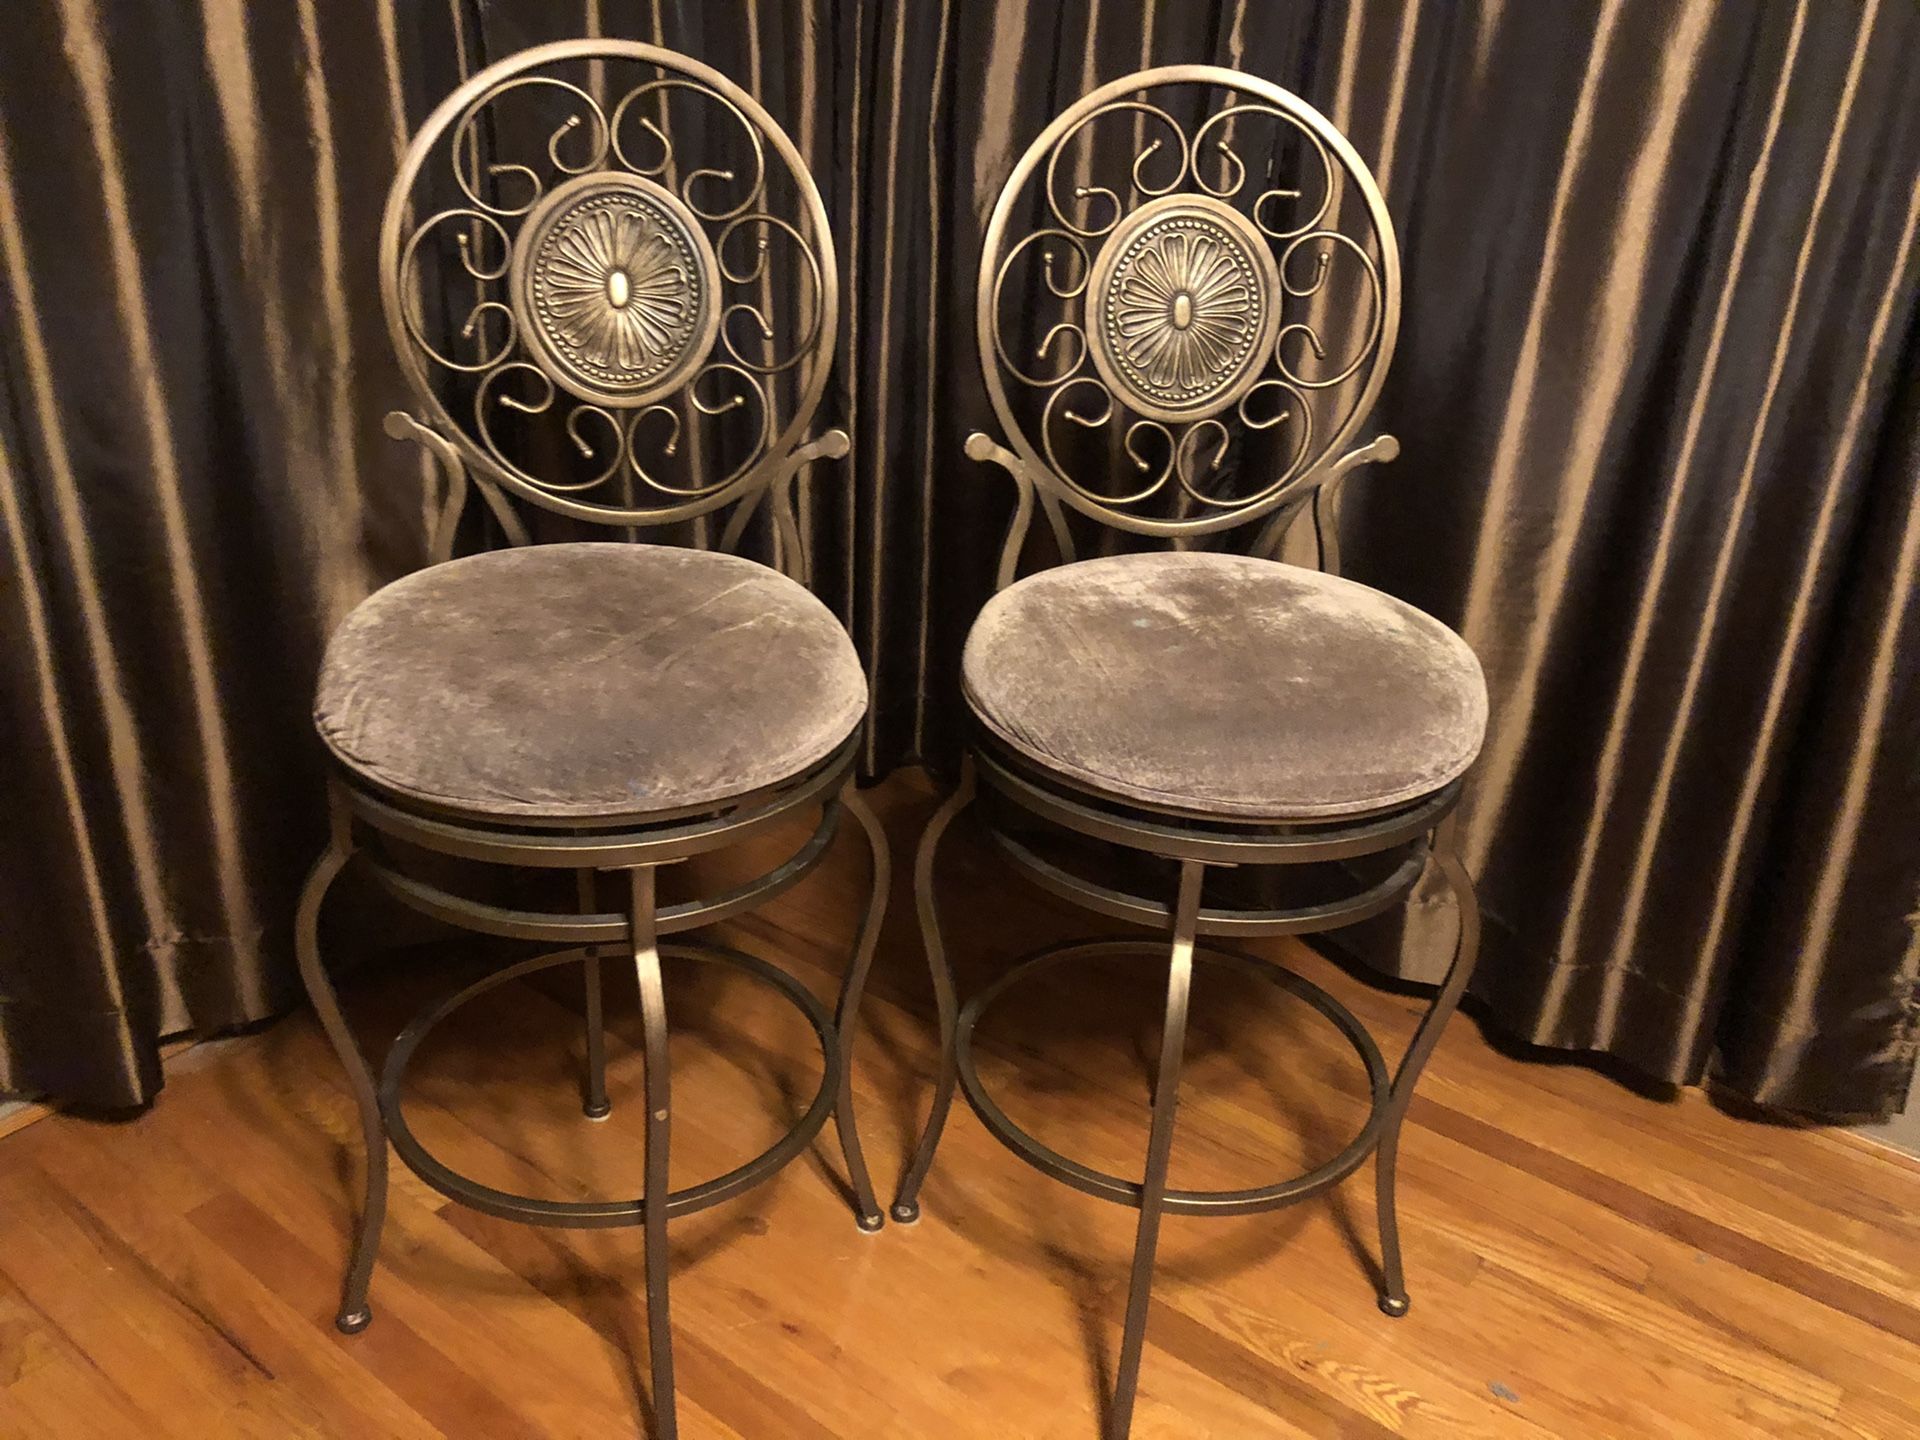 2 Clean Cushioned Stools